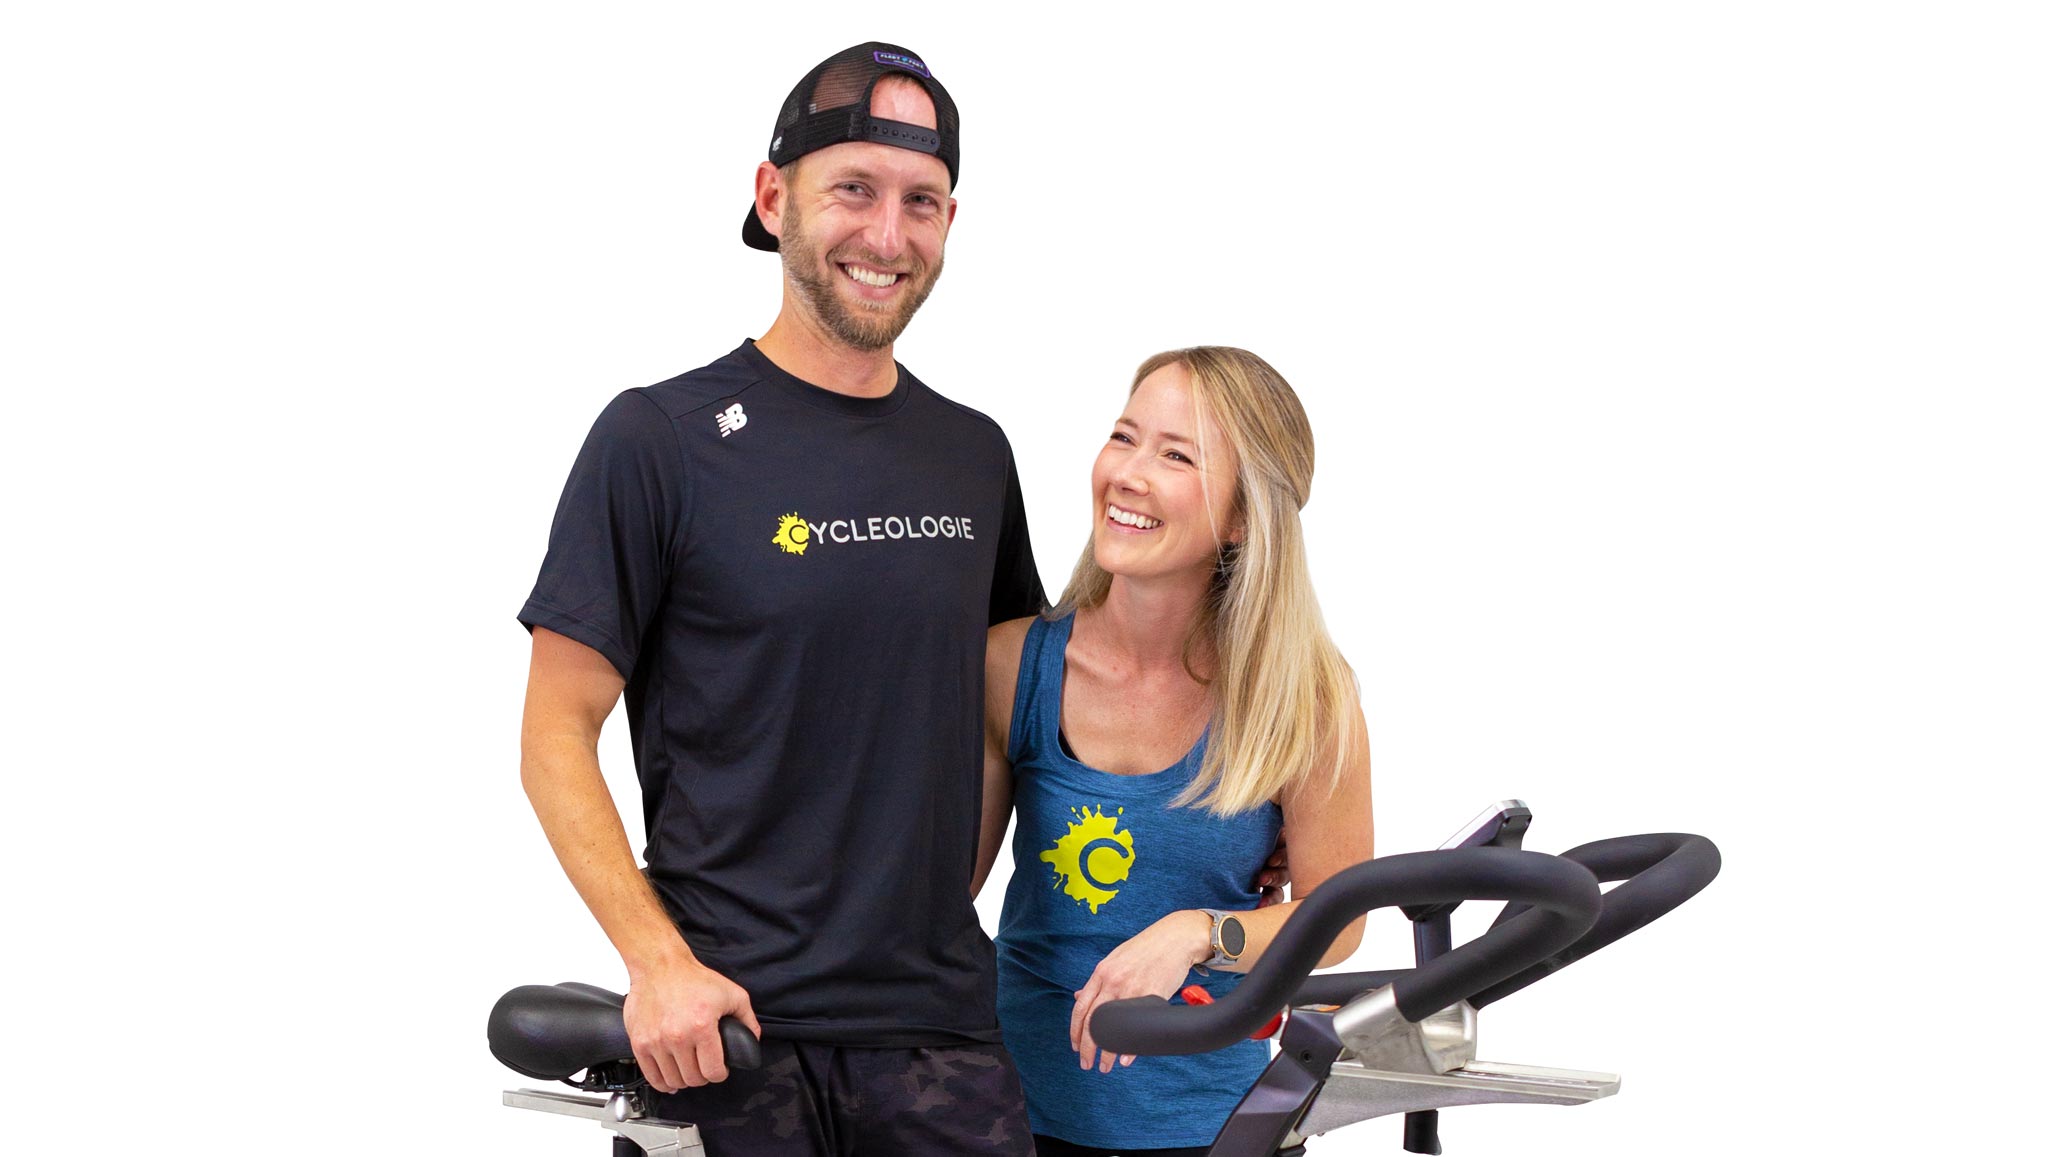 Chris and Kendra standing behind a stationary bike.